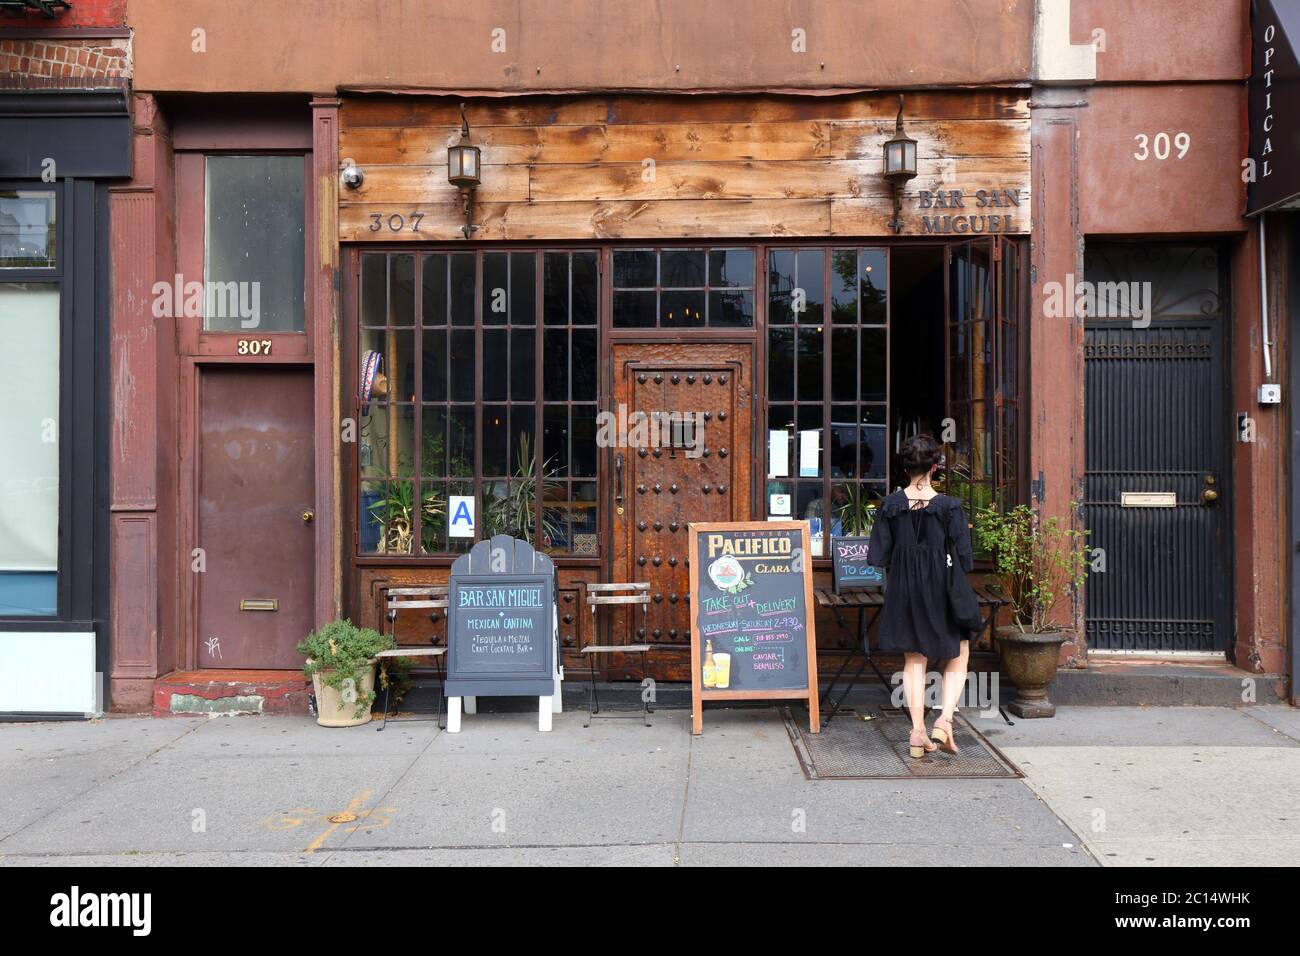 Bar San Miguel, 307 Smith Street, Brooklyn, NY. exterior storefront of a Mexican bar and restaurant in the Carroll Gardens neighborhood. Stock Photo